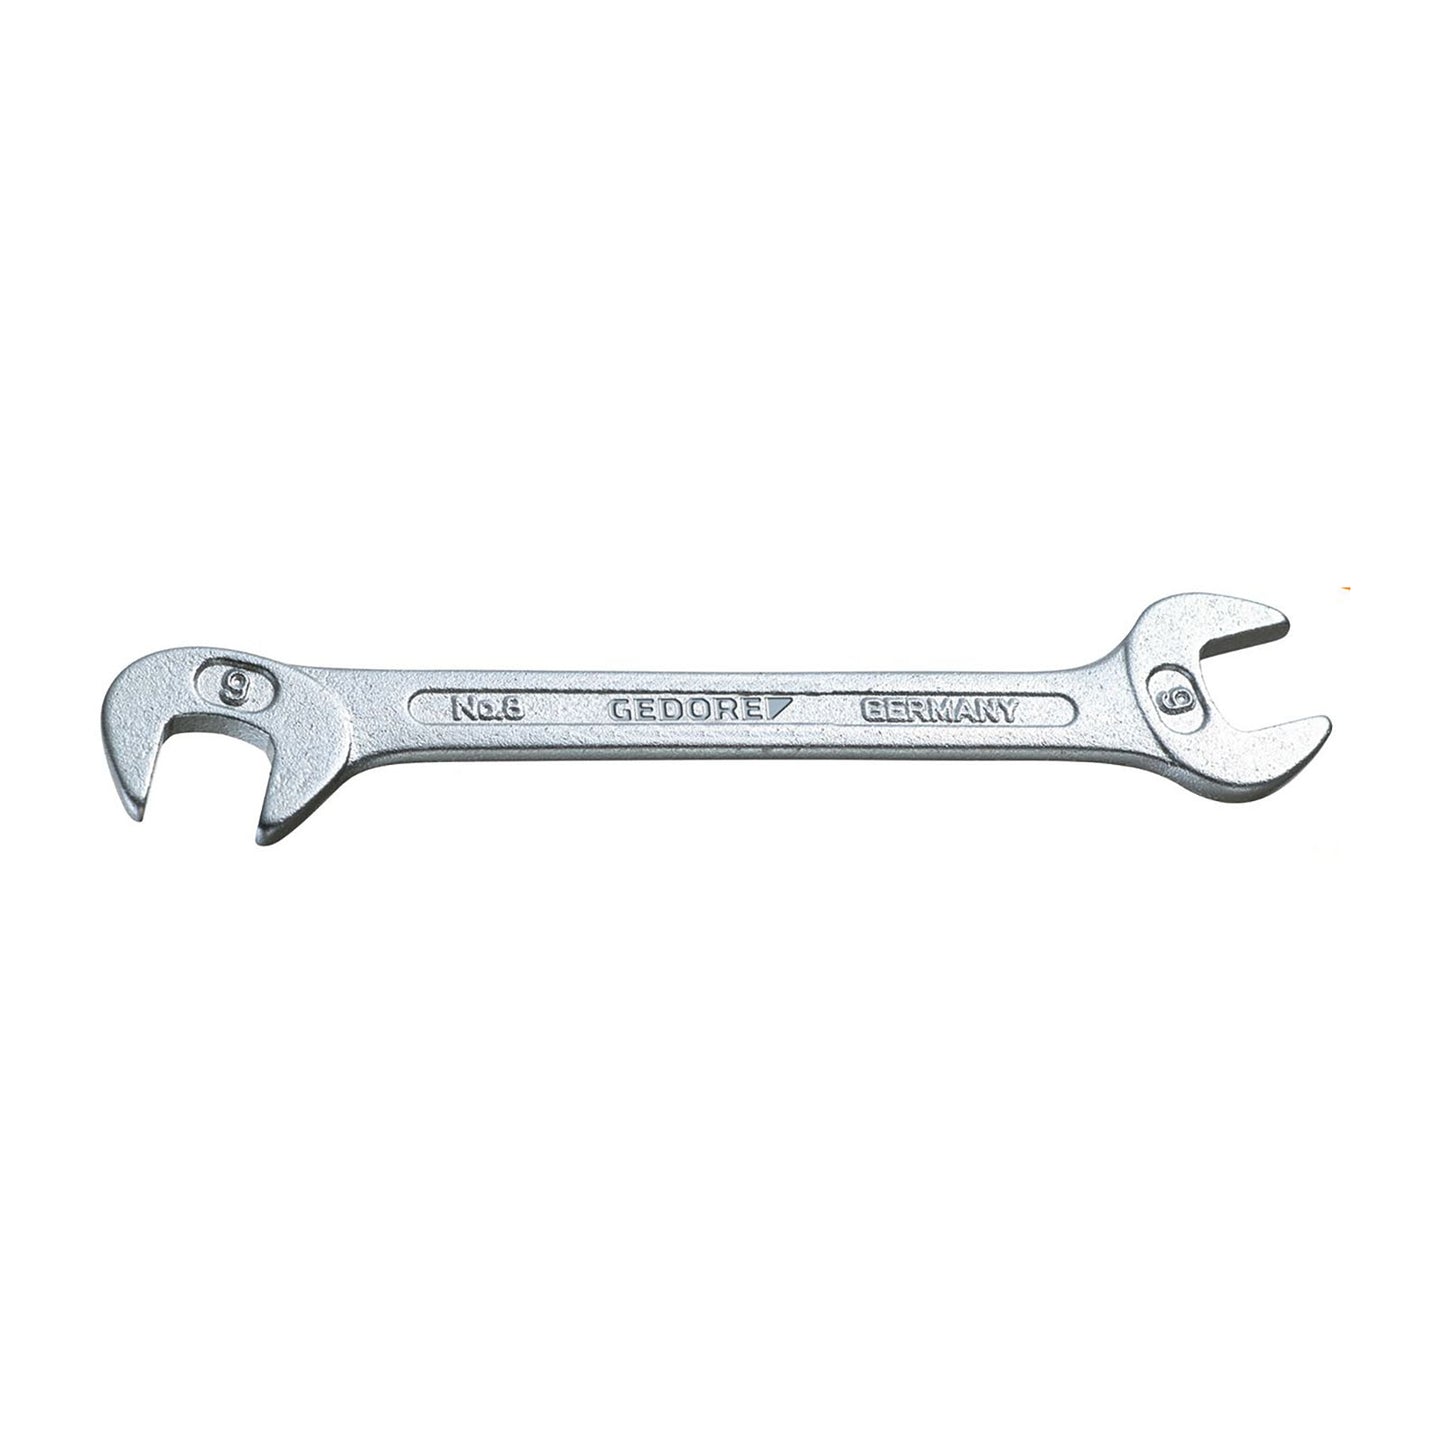 GEDORE 8 7 - Small Fixed Wrench, 7mm (6094470)